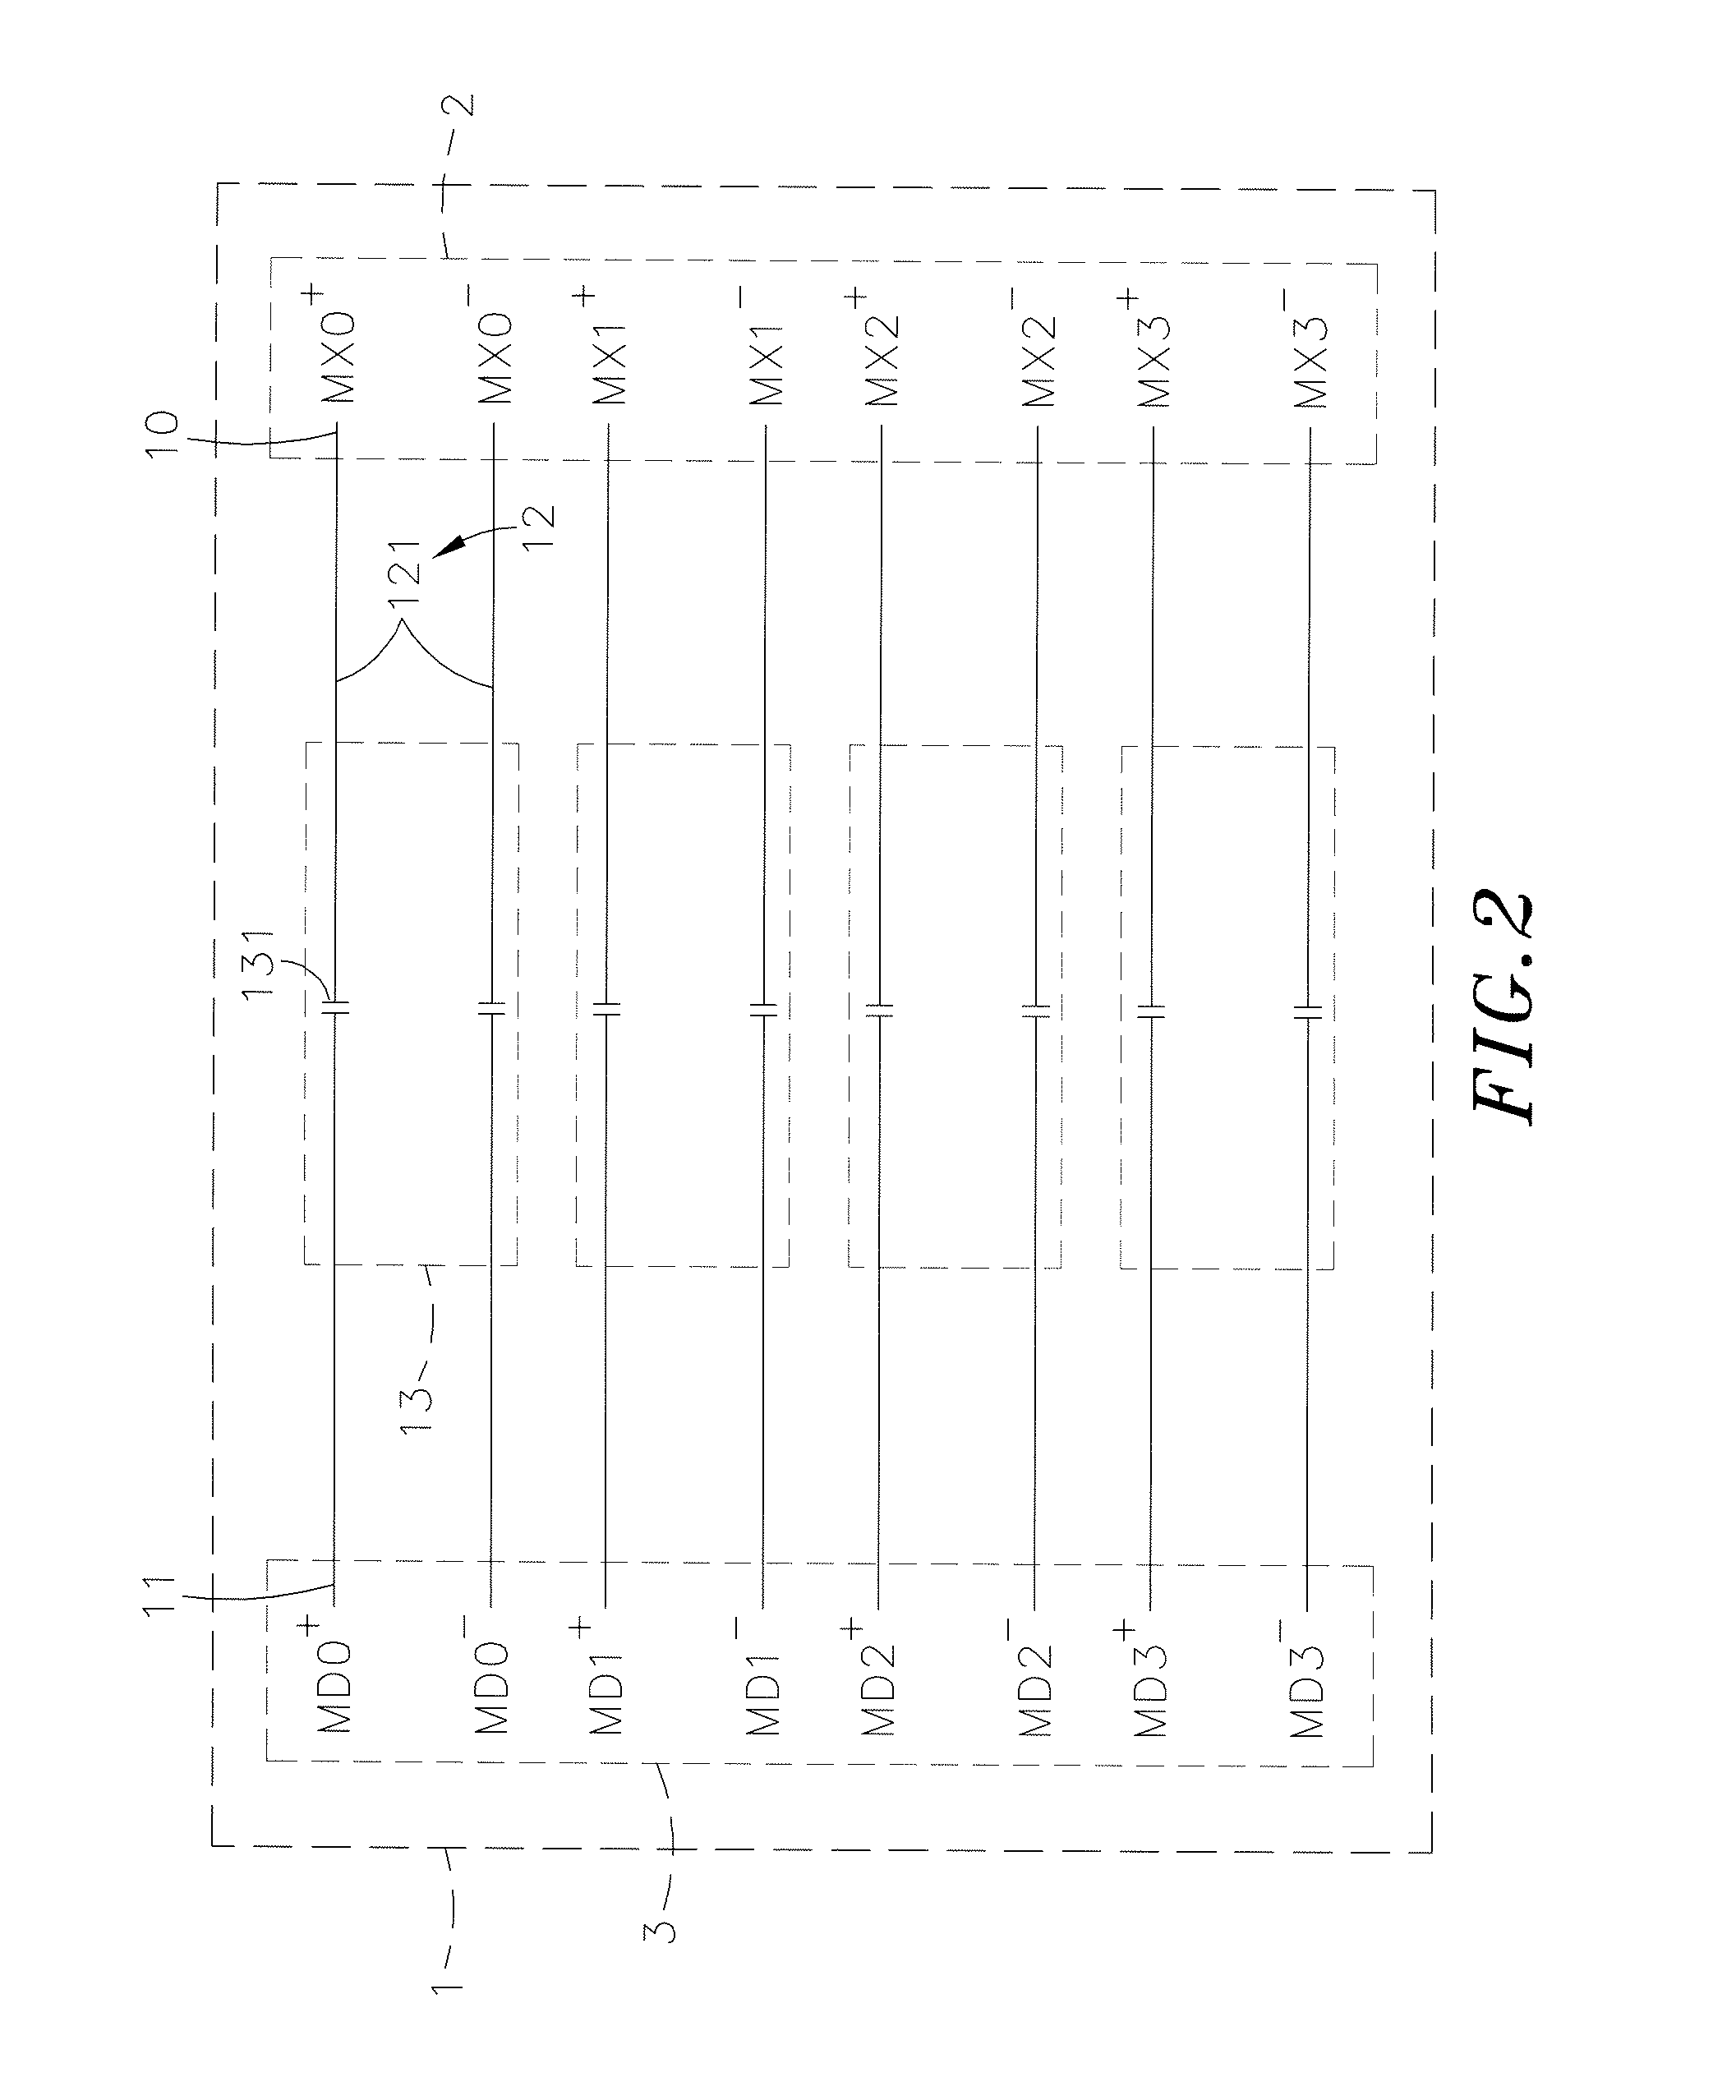 Network signal coupling circuit assembly